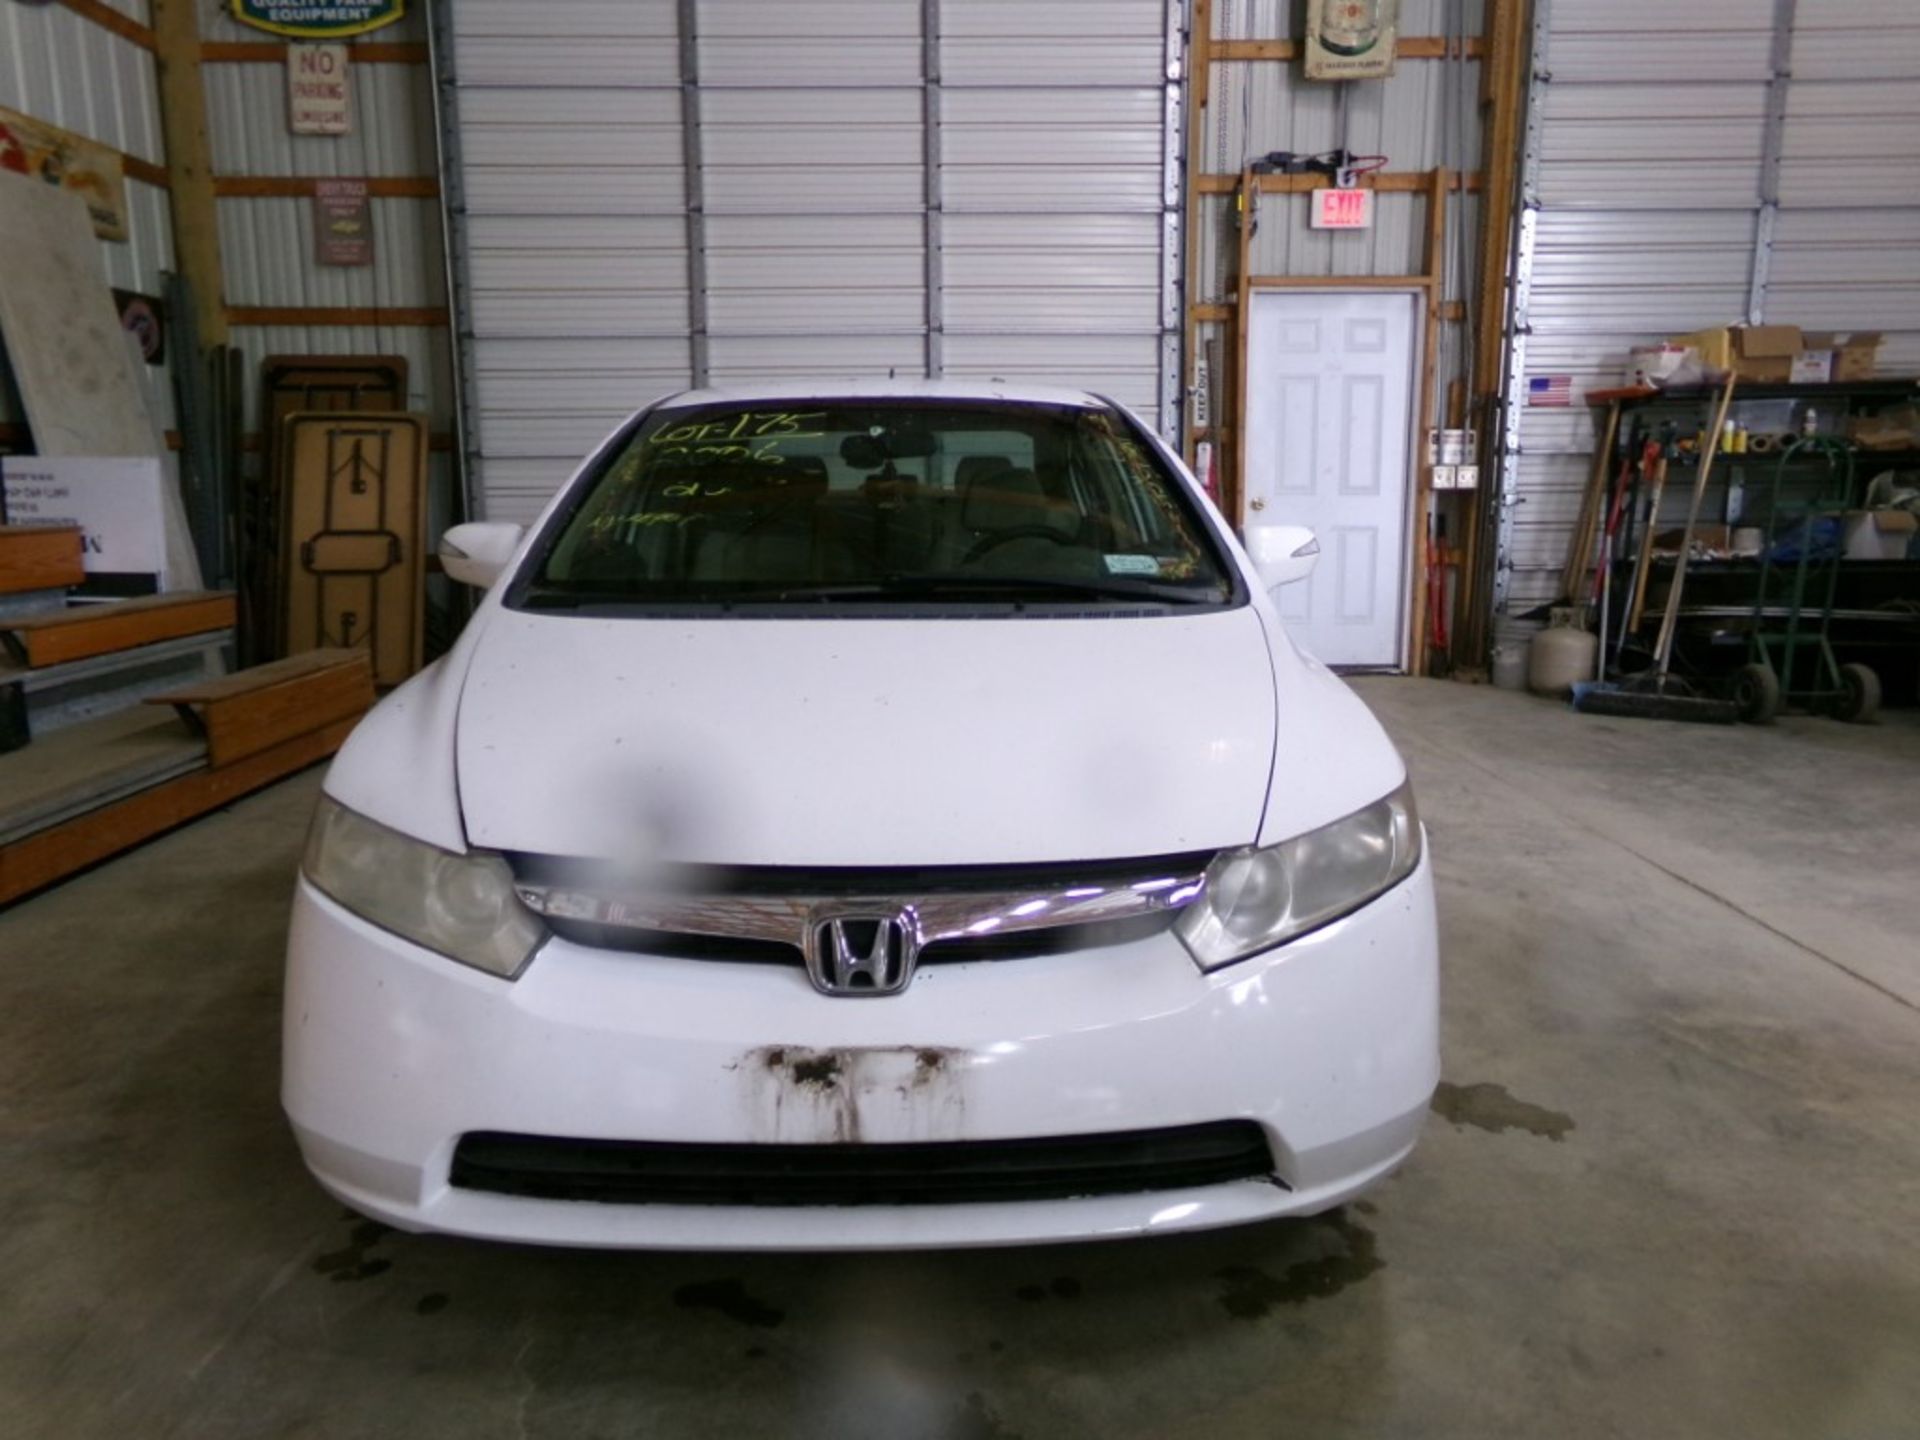 2006 Honda Civic Hybrid, White, 250,427 Miles, Vin #: JHMFA36206S004935 - NYS CHILD SUPPORT PAPERS /